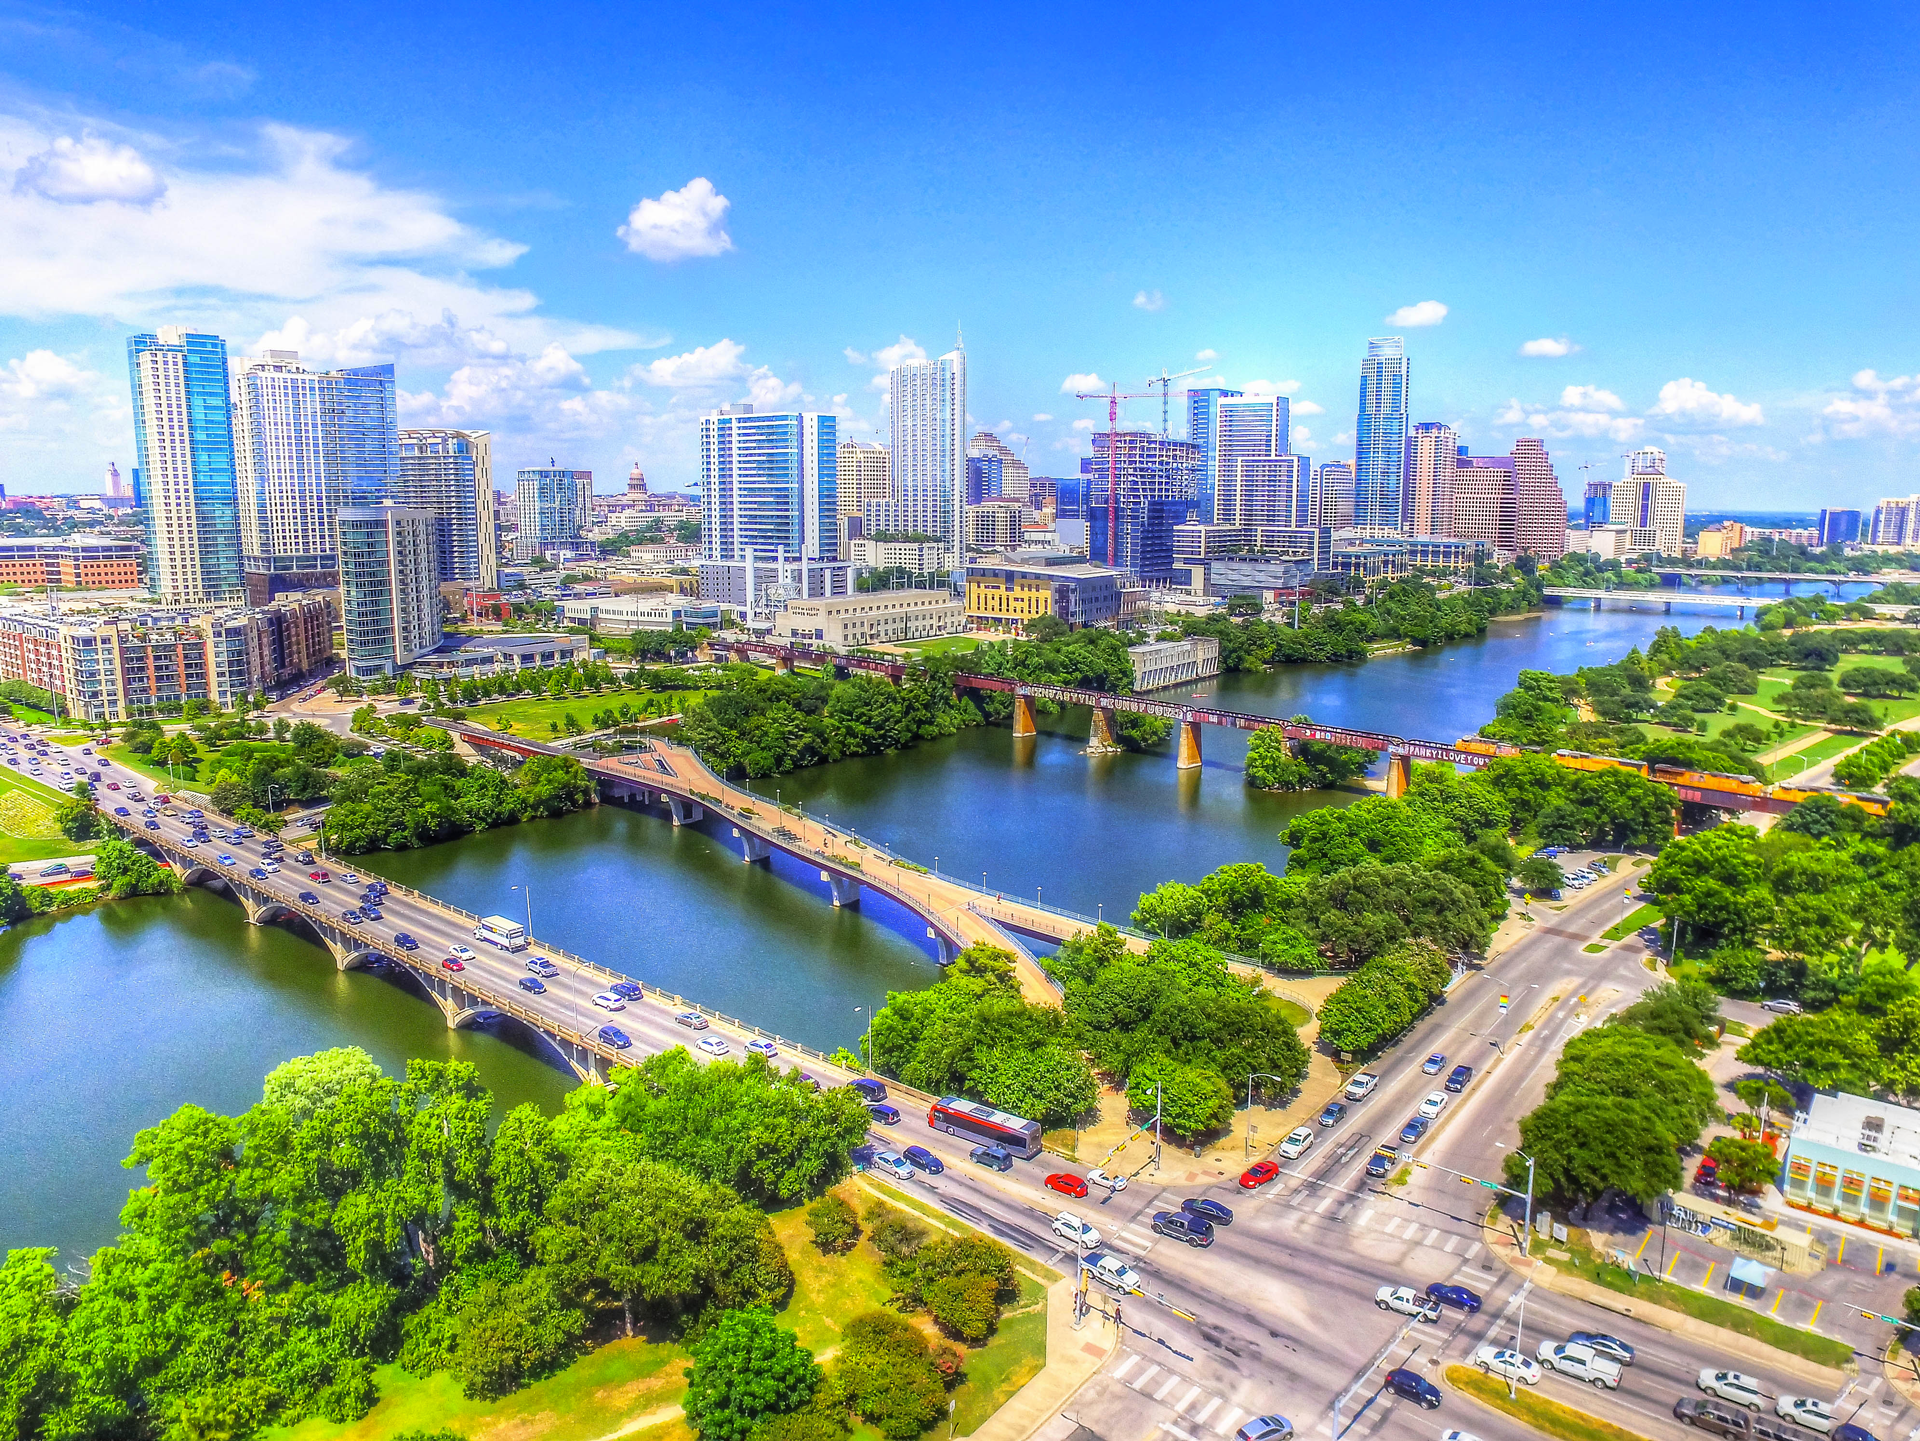 Moving to Austin: Your Guide to Living, Working and Playing in ATX